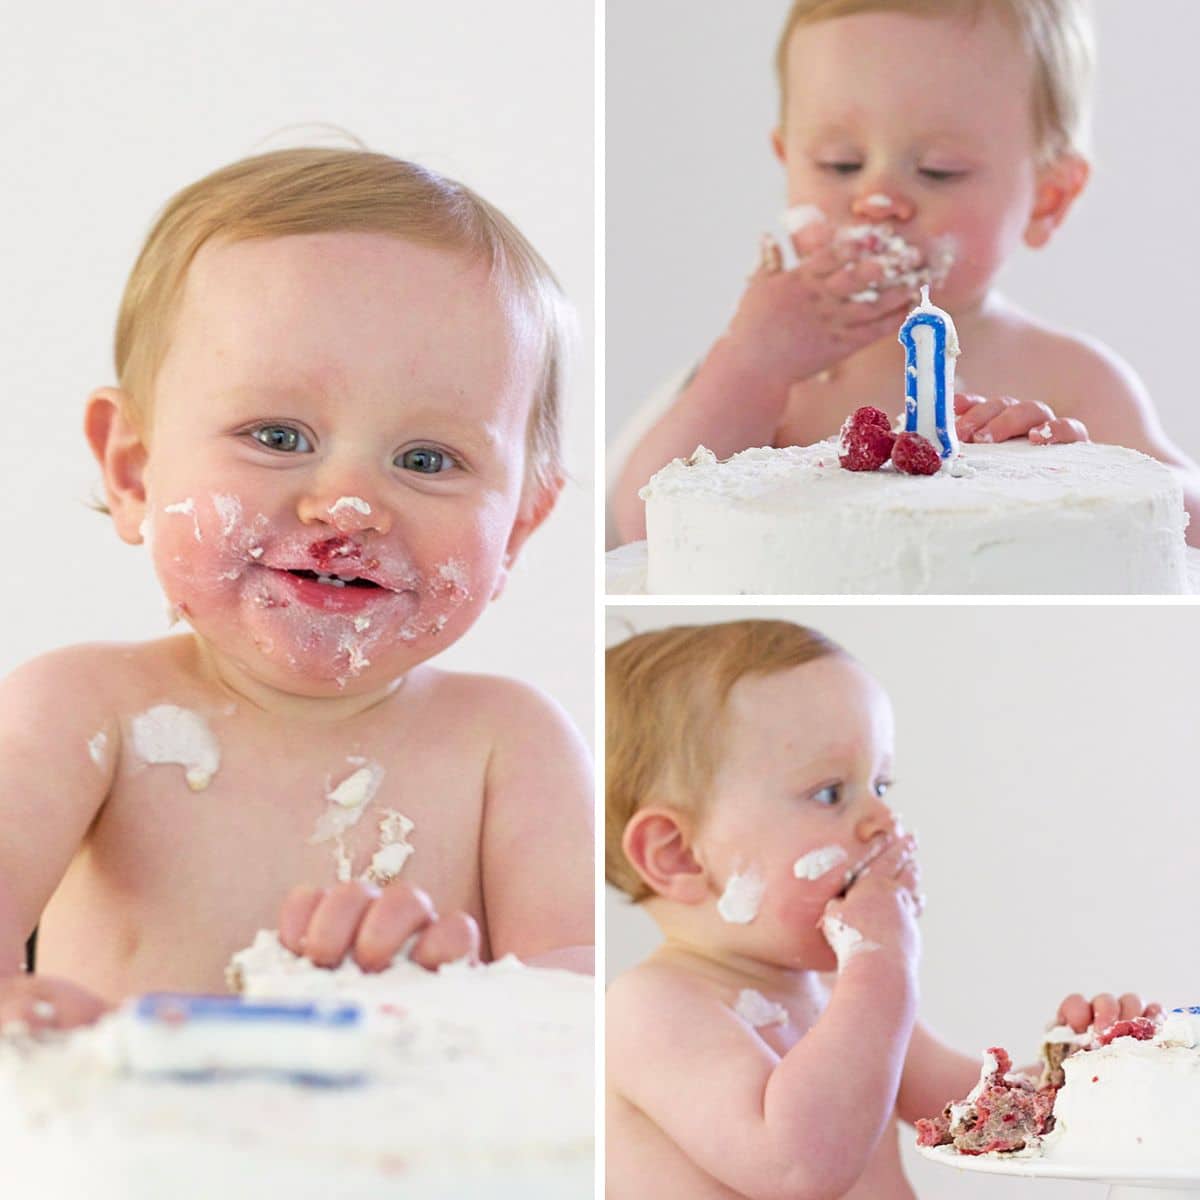 Collage of 3 Images Showing Baby Eating Healthy Smash Cake on First Birthday.